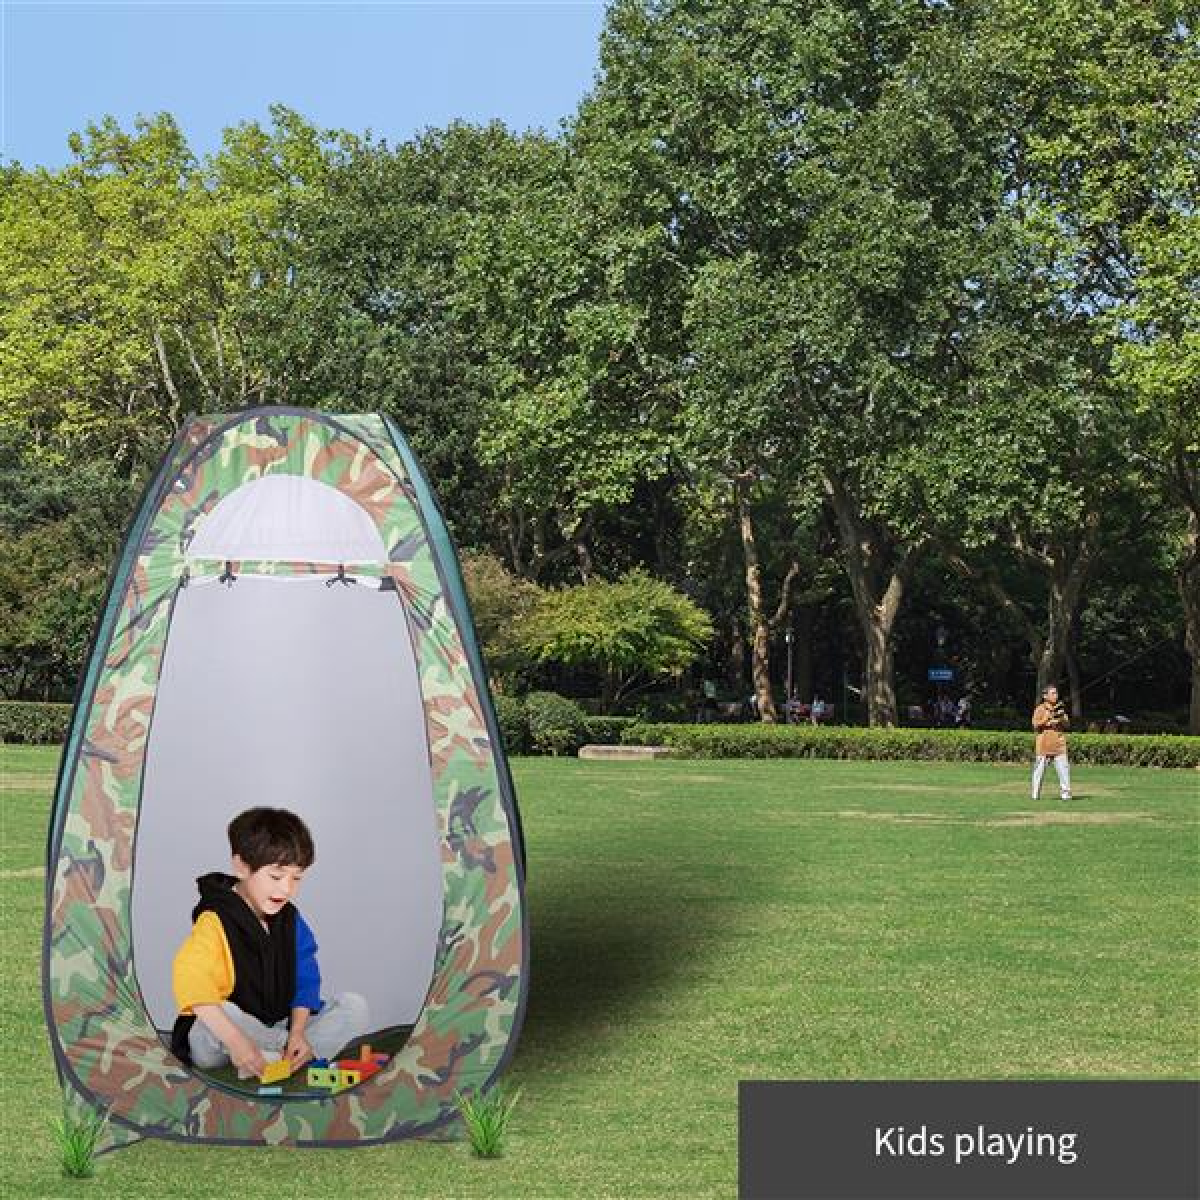 US IN STOCK- Shower Tents For Camping Pop-Up Privacy TentPortable Shower Tent Outdoor Camp Bathroom Changing Dressing Room Instant Privacy Shelters for Hiking Beach Picnic Fishing Potty - image 5 of 13